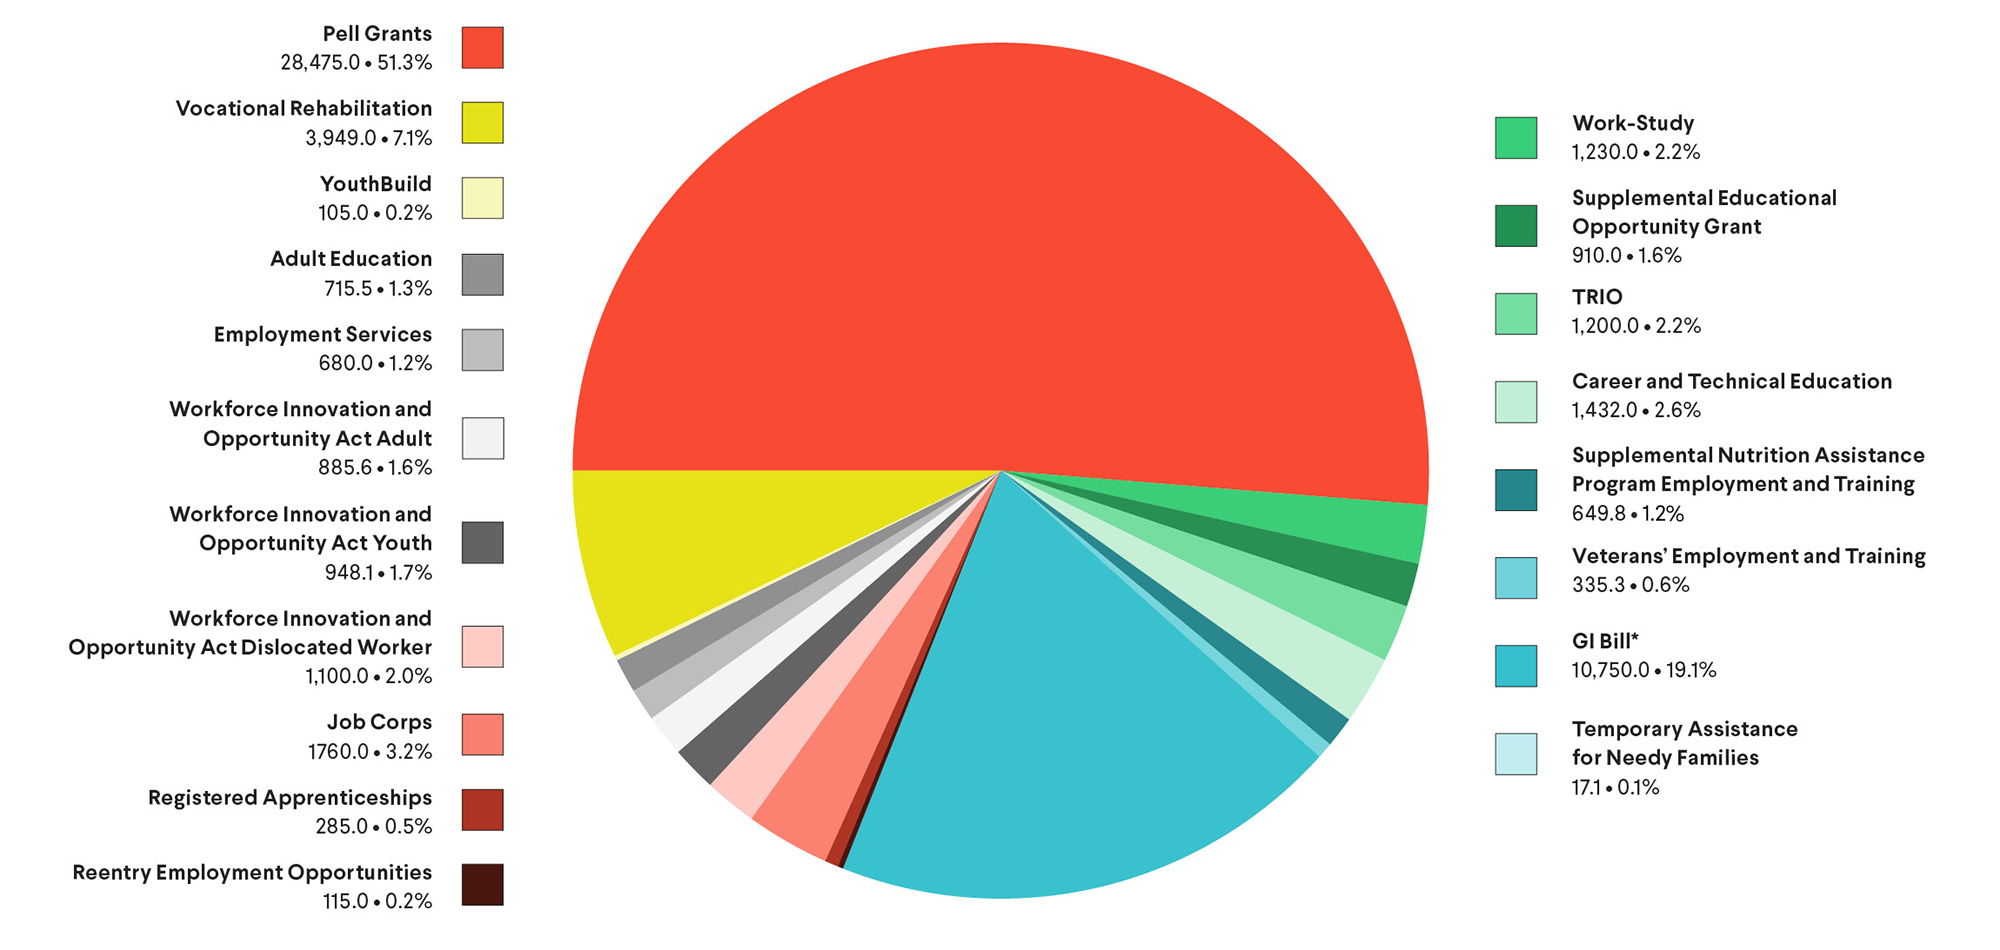 Pie chart showing percentages of FY23 federal funding for workforce-related education and training programs. The chart shows that 51.3% of federal funding for FY23 went to Pell Grants, while 19.1% went to the GI Bill. The percentages for each of the remaining 17 categories range between 0.1% and 7.1% per category.